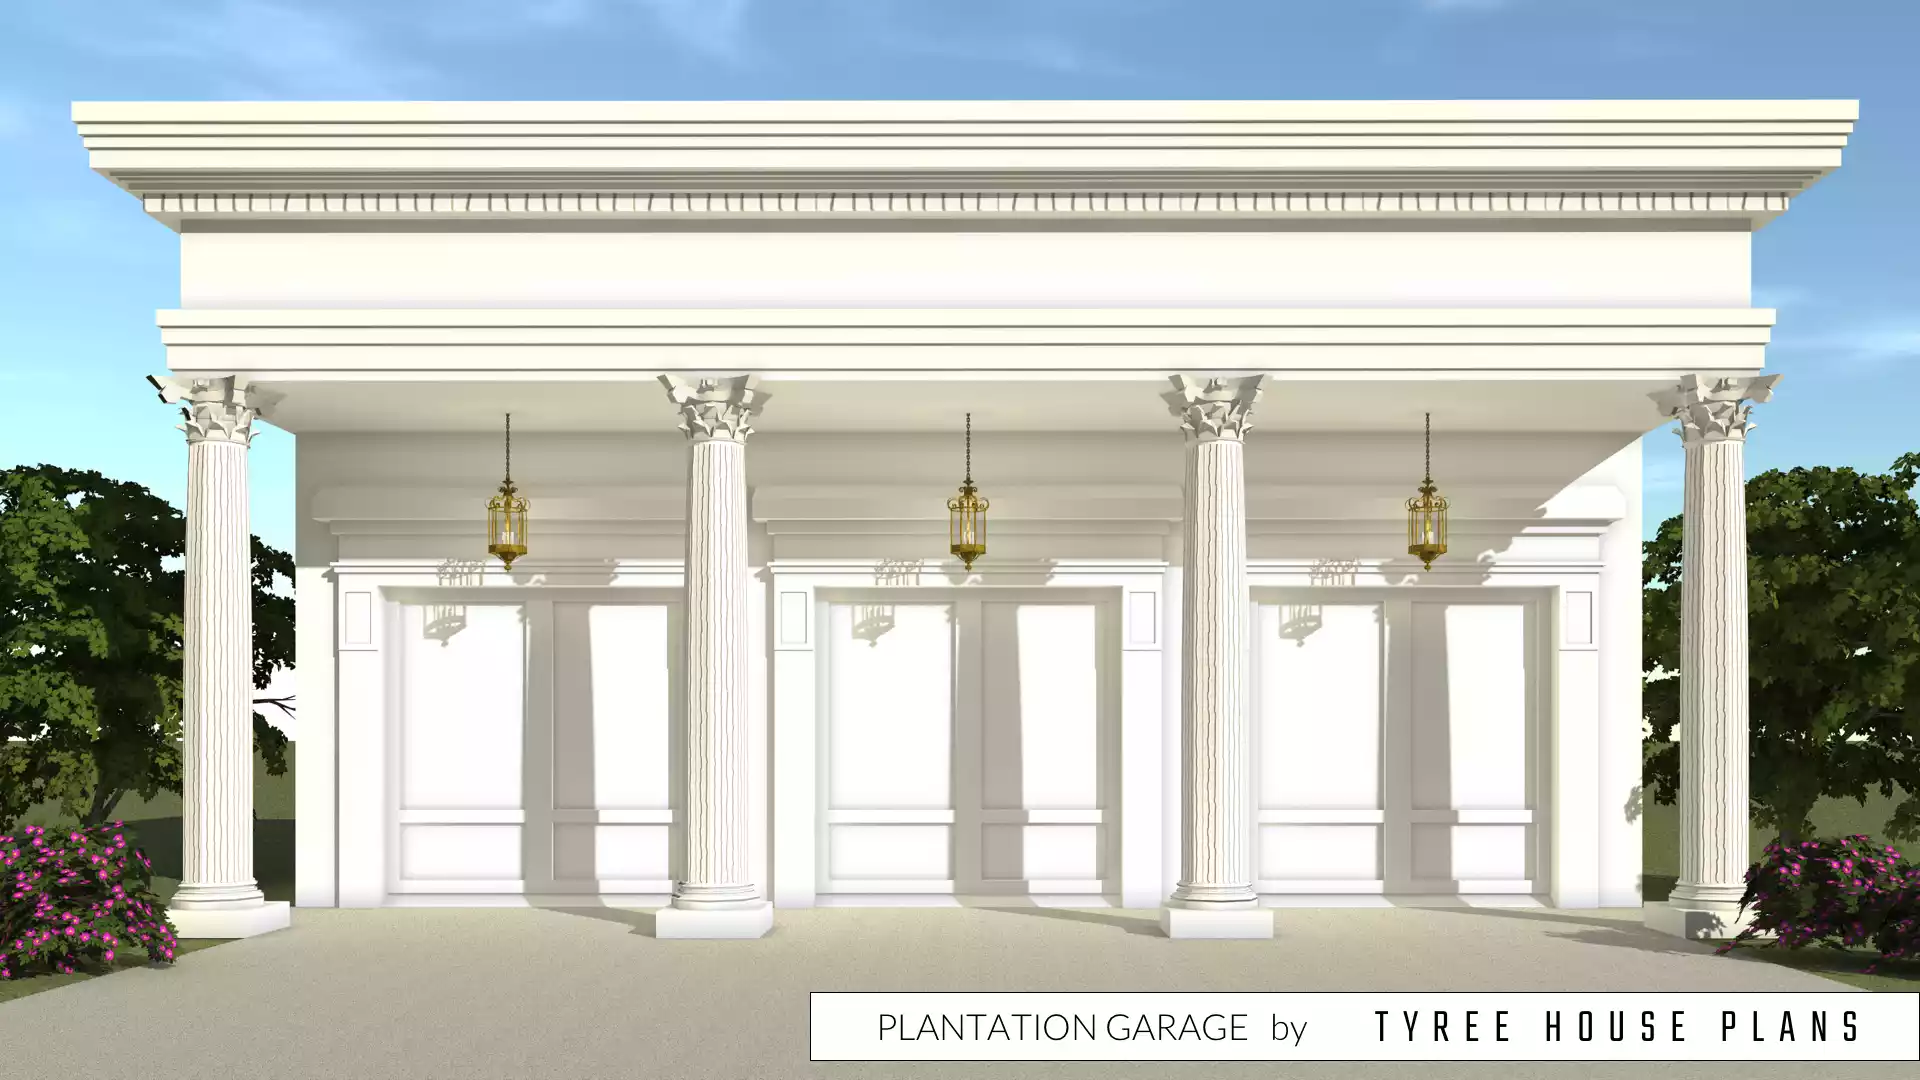 Plantation Garage by Tyree House Plans.